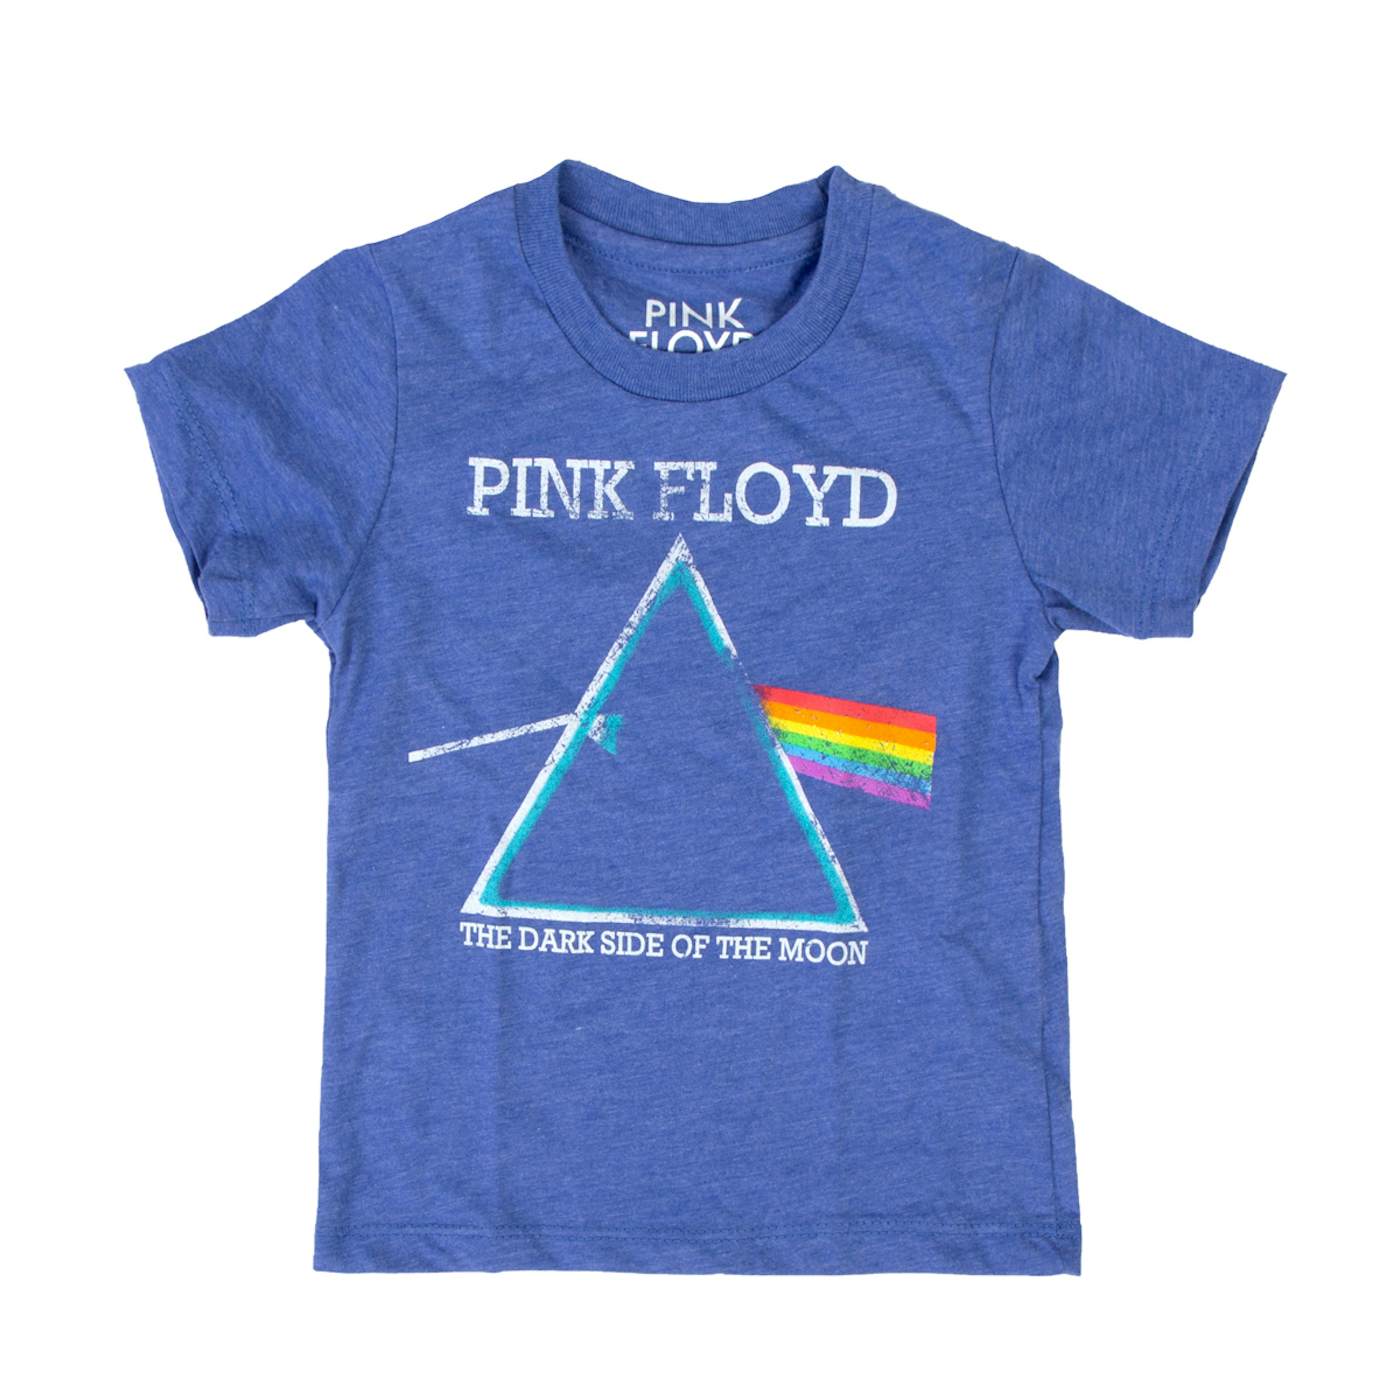 The Dark Side of the Moon Heather Blue Kids T-Shirt